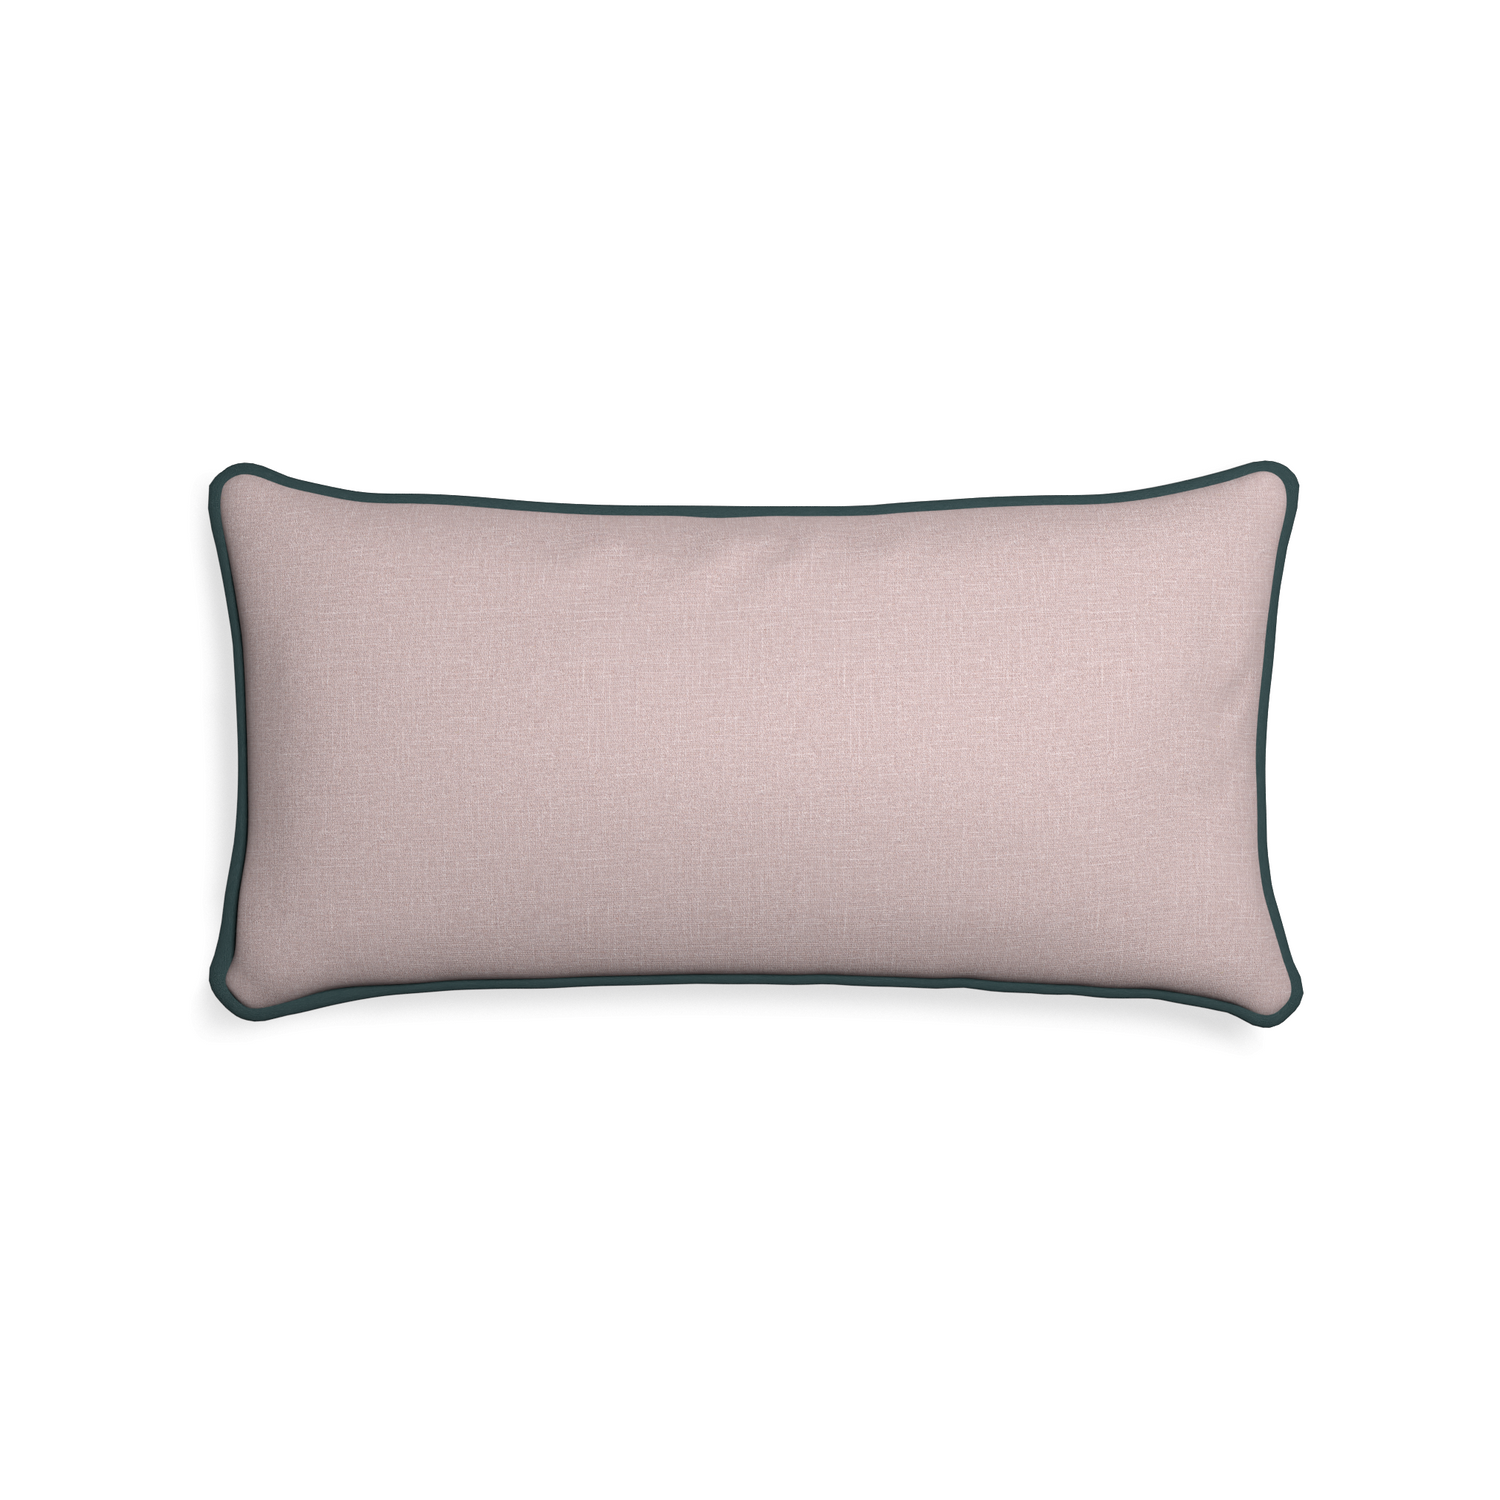 Midi-lumbar orchid custom mauve pinkpillow with p piping on white background